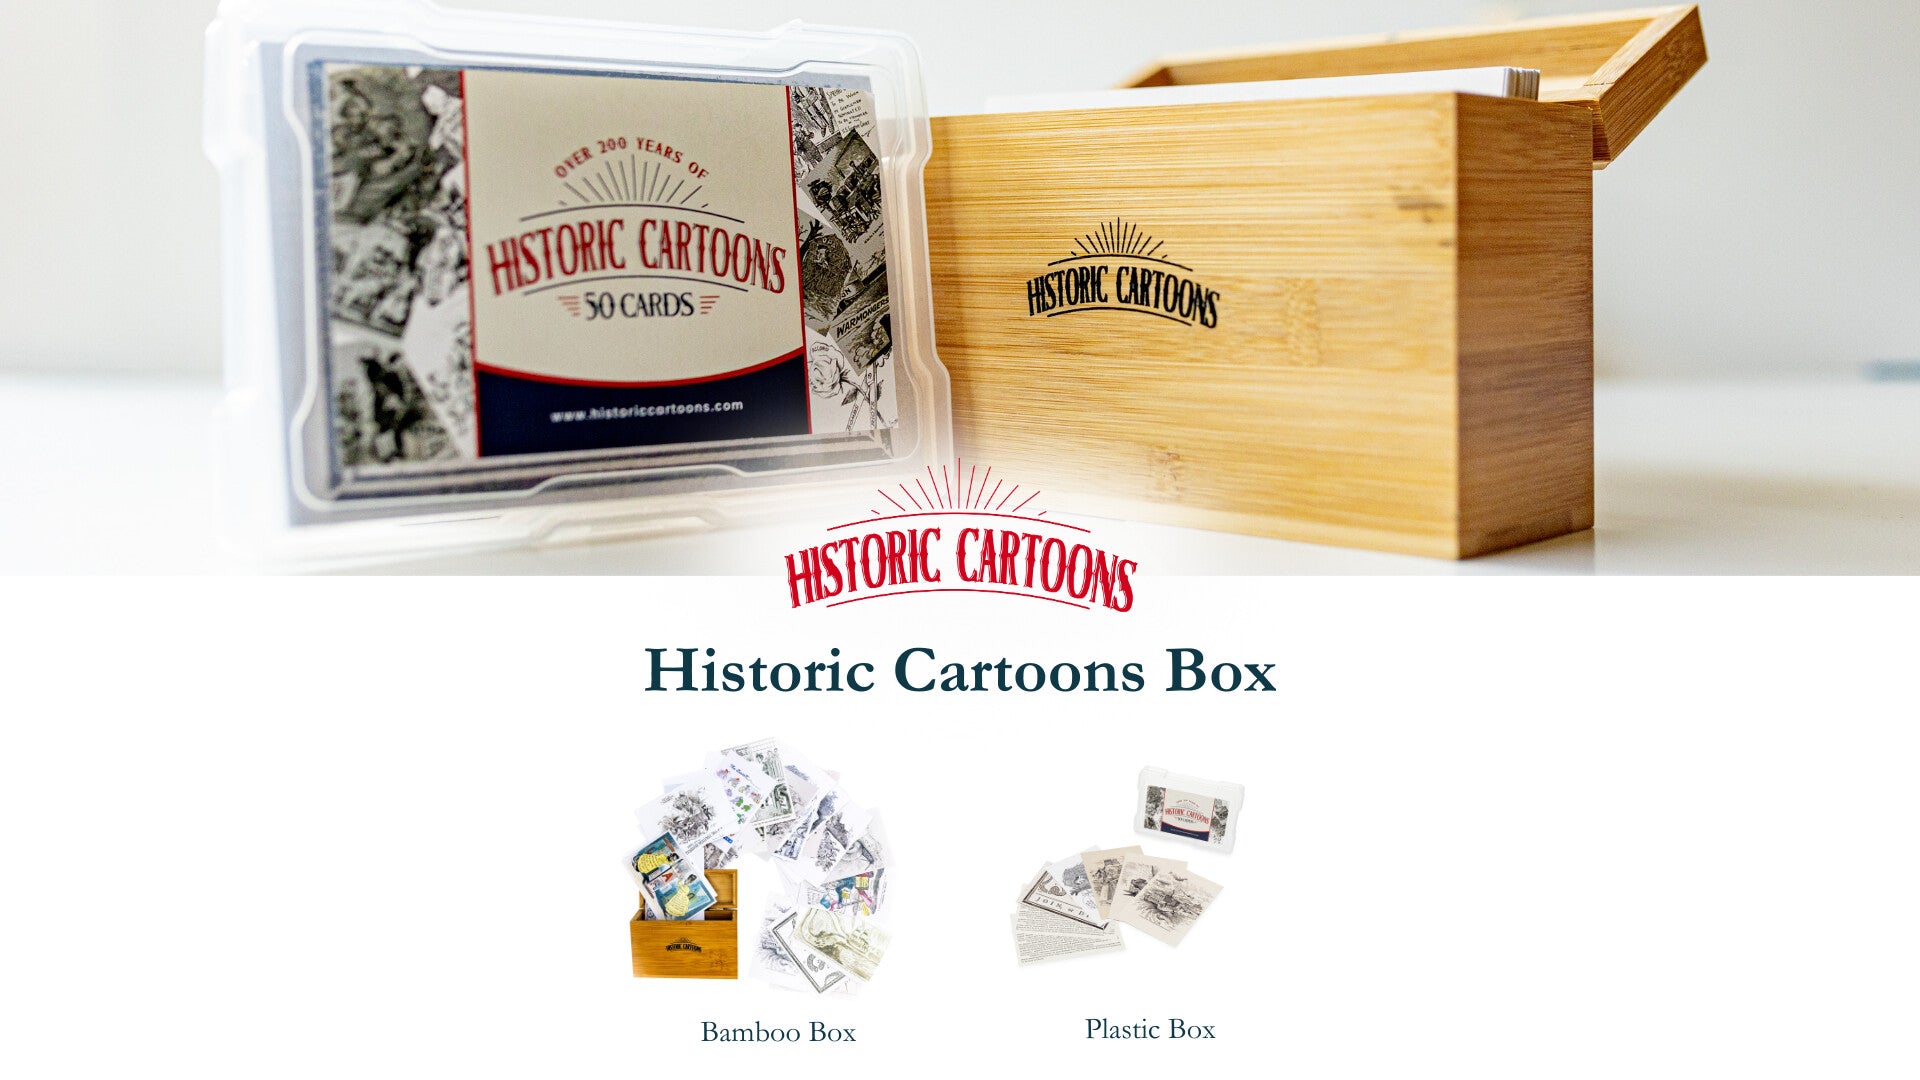 History By Mail's Historic Cartoons Box: 50 cards printed on high-quality card stock in original colors with descriptions of historical context and explanations of each image.